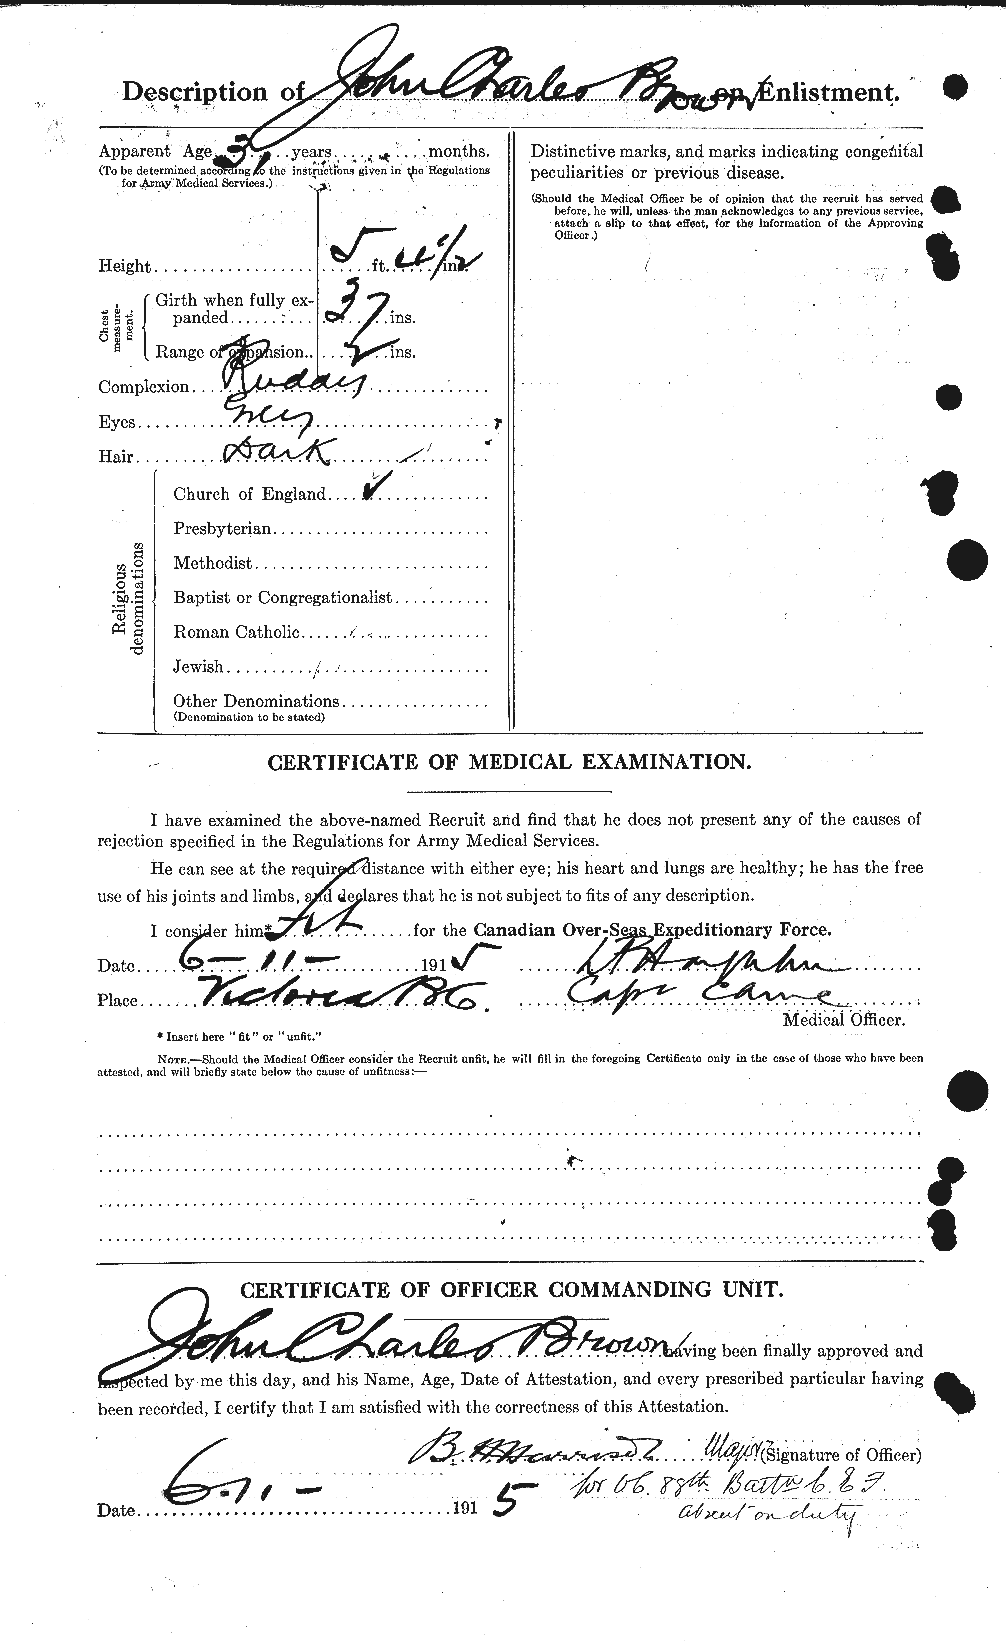 Personnel Records of the First World War - CEF 264577b